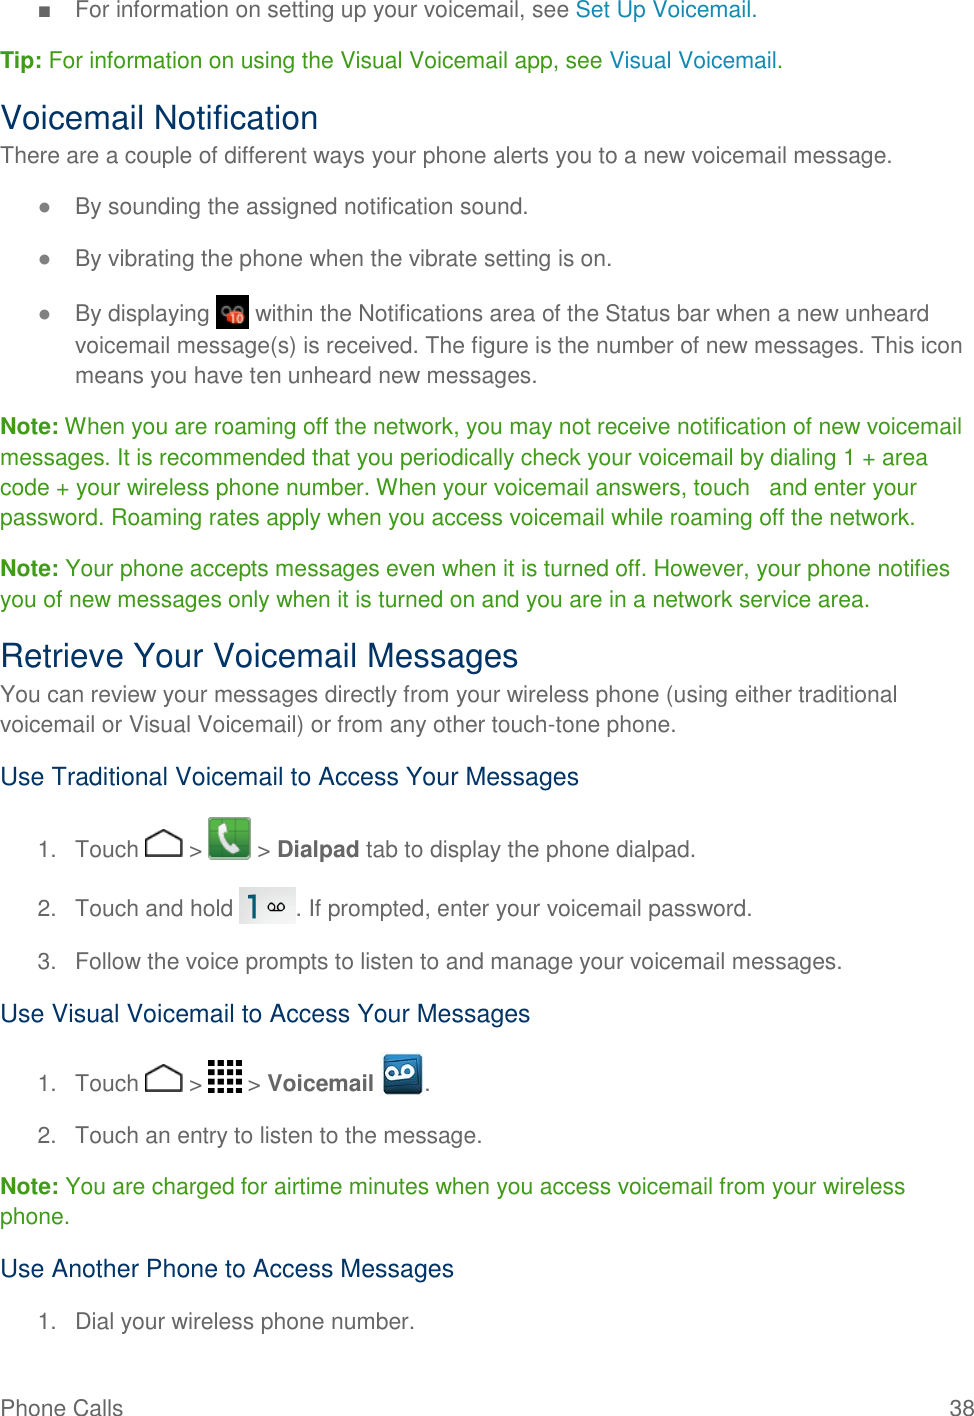 Phone Calls   38 ■  For information on setting up your voicemail, see Set Up Voicemail.  Tip: For information on using the Visual Voicemail app, see Visual Voicemail. Voicemail Notification There are a couple of different ways your phone alerts you to a new voicemail message. ● By sounding the assigned notification sound. ● By vibrating the phone when the vibrate setting is on. ● By displaying   within the Notifications area of the Status bar when a new unheard voicemail message(s) is received. The figure is the number of new messages. This icon means you have ten unheard new messages. Note: When you are roaming off the network, you may not receive notification of new voicemail messages. It is recommended that you periodically check your voicemail by dialing 1 + area code + your wireless phone number. When your voicemail answers, touch   and enter your password. Roaming rates apply when you access voicemail while roaming off the network. Note: Your phone accepts messages even when it is turned off. However, your phone notifies you of new messages only when it is turned on and you are in a network service area. Retrieve Your Voicemail Messages You can review your messages directly from your wireless phone (using either traditional voicemail or Visual Voicemail) or from any other touch-tone phone. Use Traditional Voicemail to Access Your Messages 1.  Touch   &gt;   &gt; Dialpad tab to display the phone dialpad. 2.  Touch and hold  . If prompted, enter your voicemail password. 3.  Follow the voice prompts to listen to and manage your voicemail messages. Use Visual Voicemail to Access Your Messages 1.  Touch   &gt;   &gt; Voicemail  . 2.  Touch an entry to listen to the message. Note: You are charged for airtime minutes when you access voicemail from your wireless phone. Use Another Phone to Access Messages 1.  Dial your wireless phone number. 